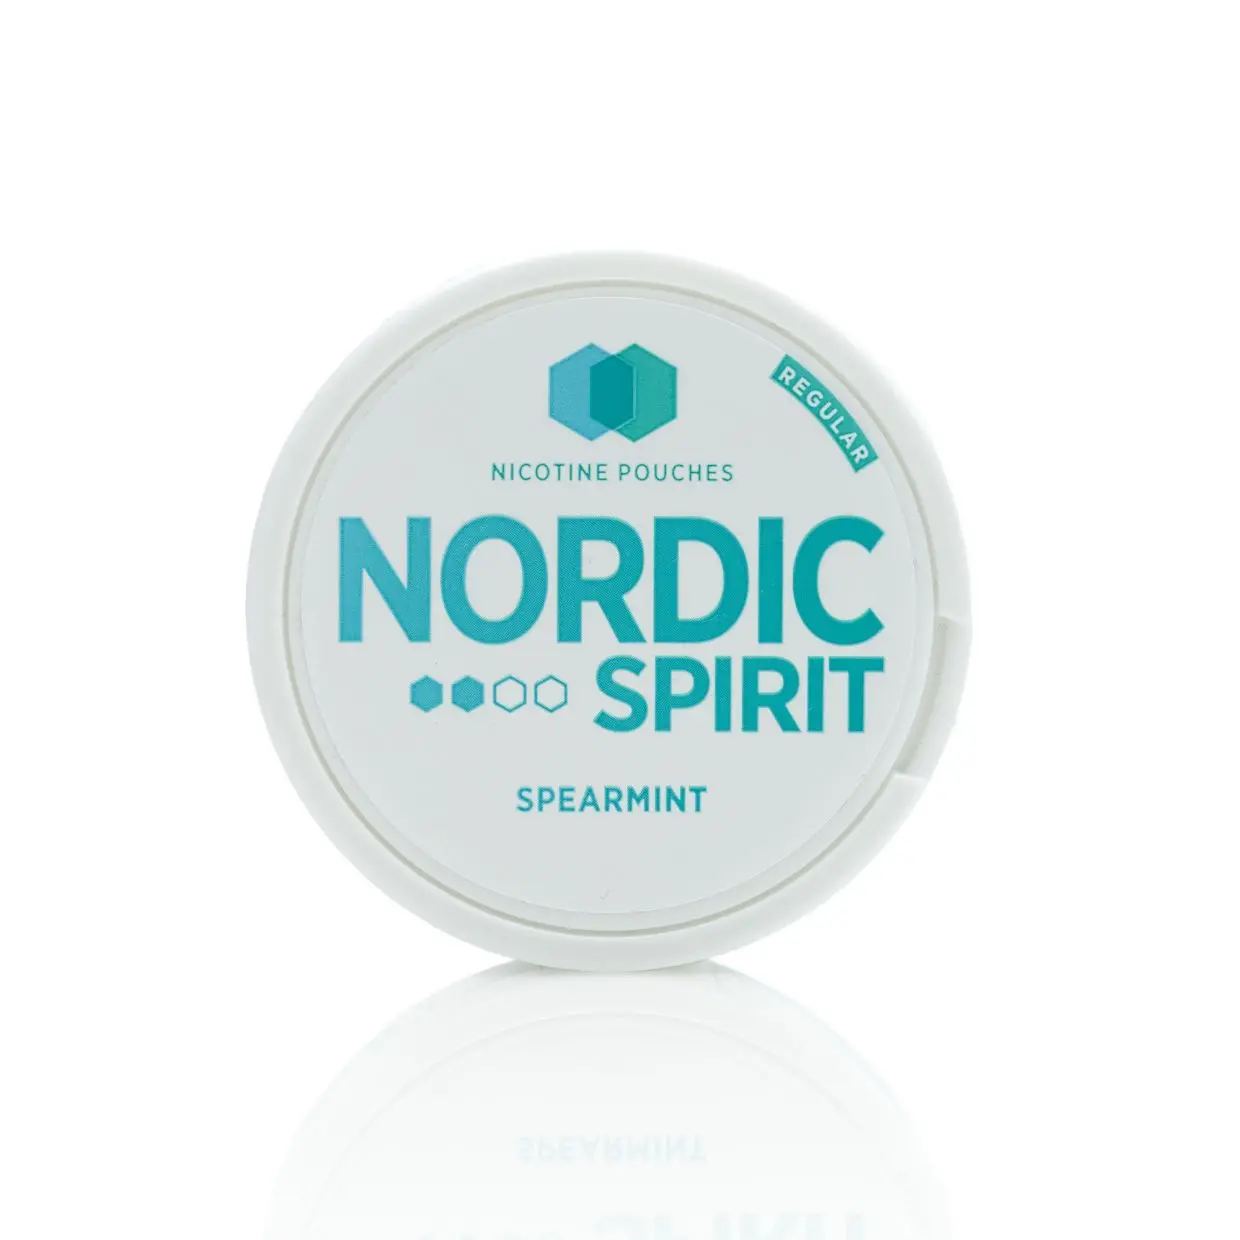  Spearmint Nicotine Pouches by Nordic Spirit  